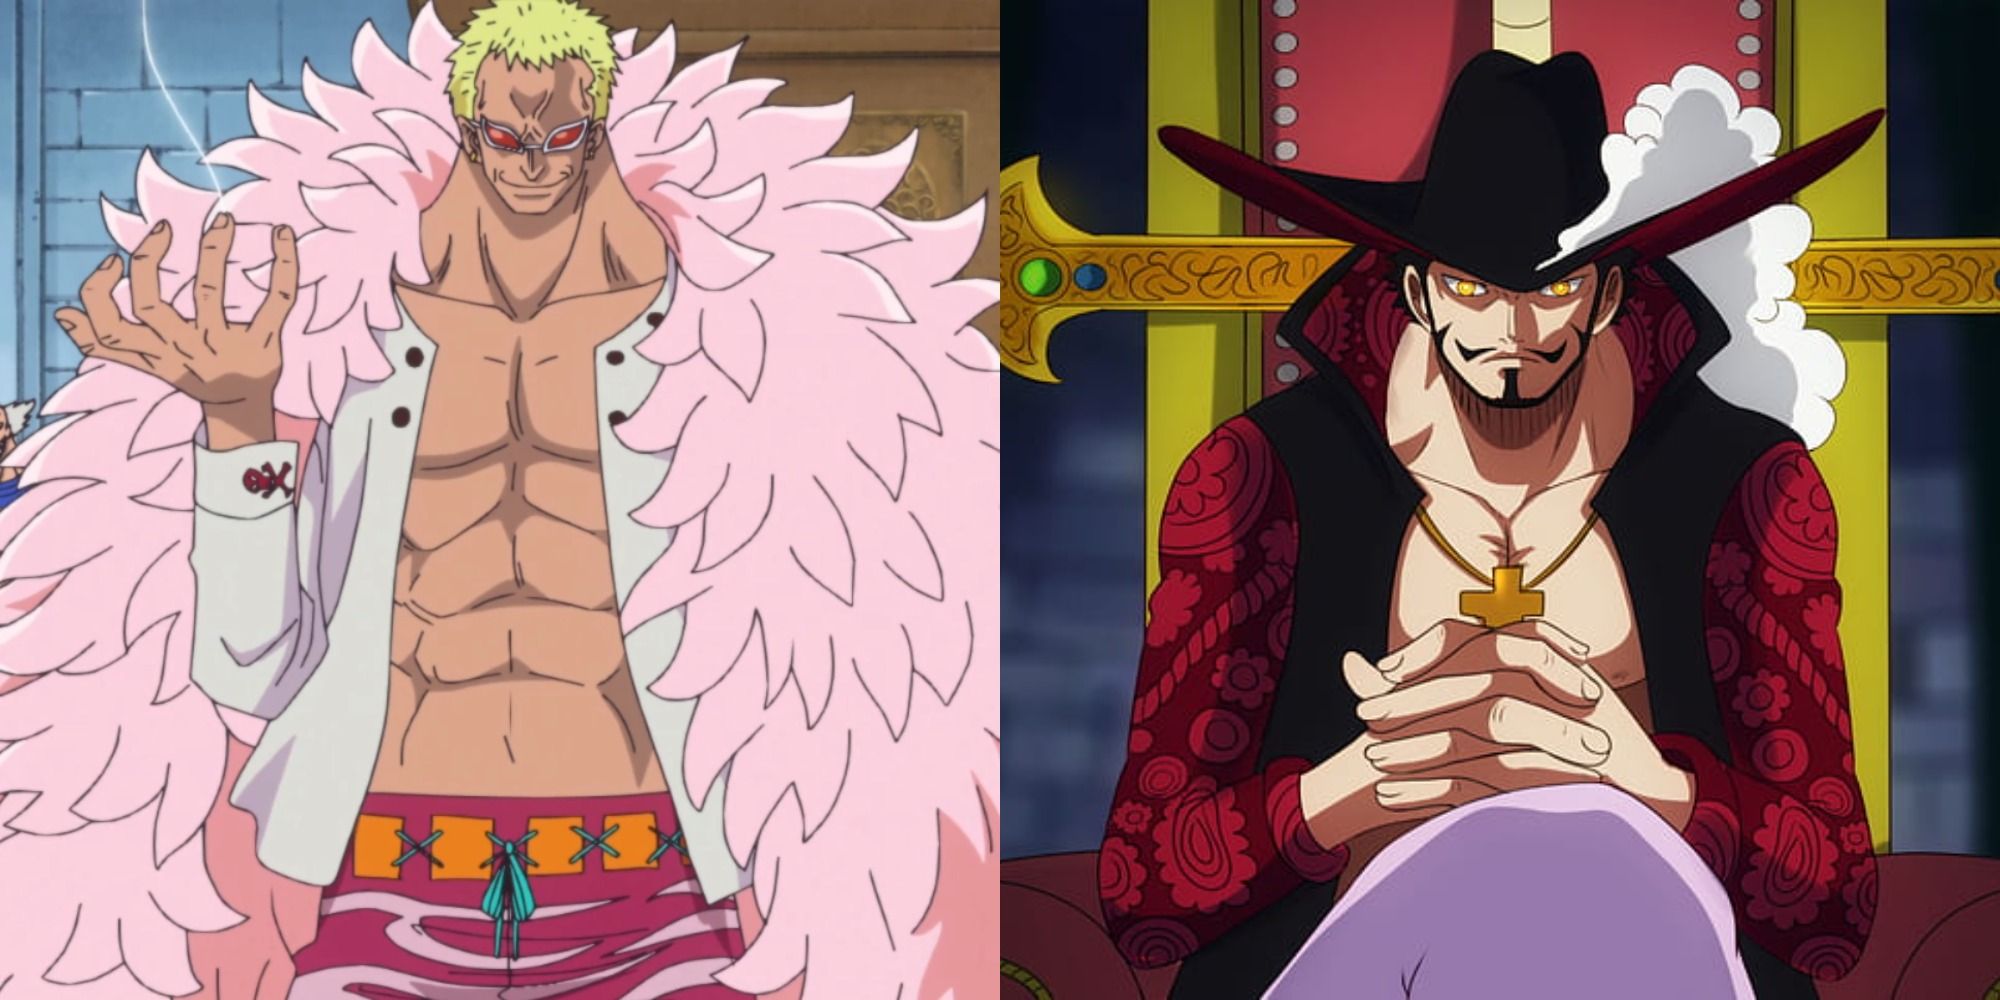 Ranking of the 7 Strongest Shichibukai in One Piece